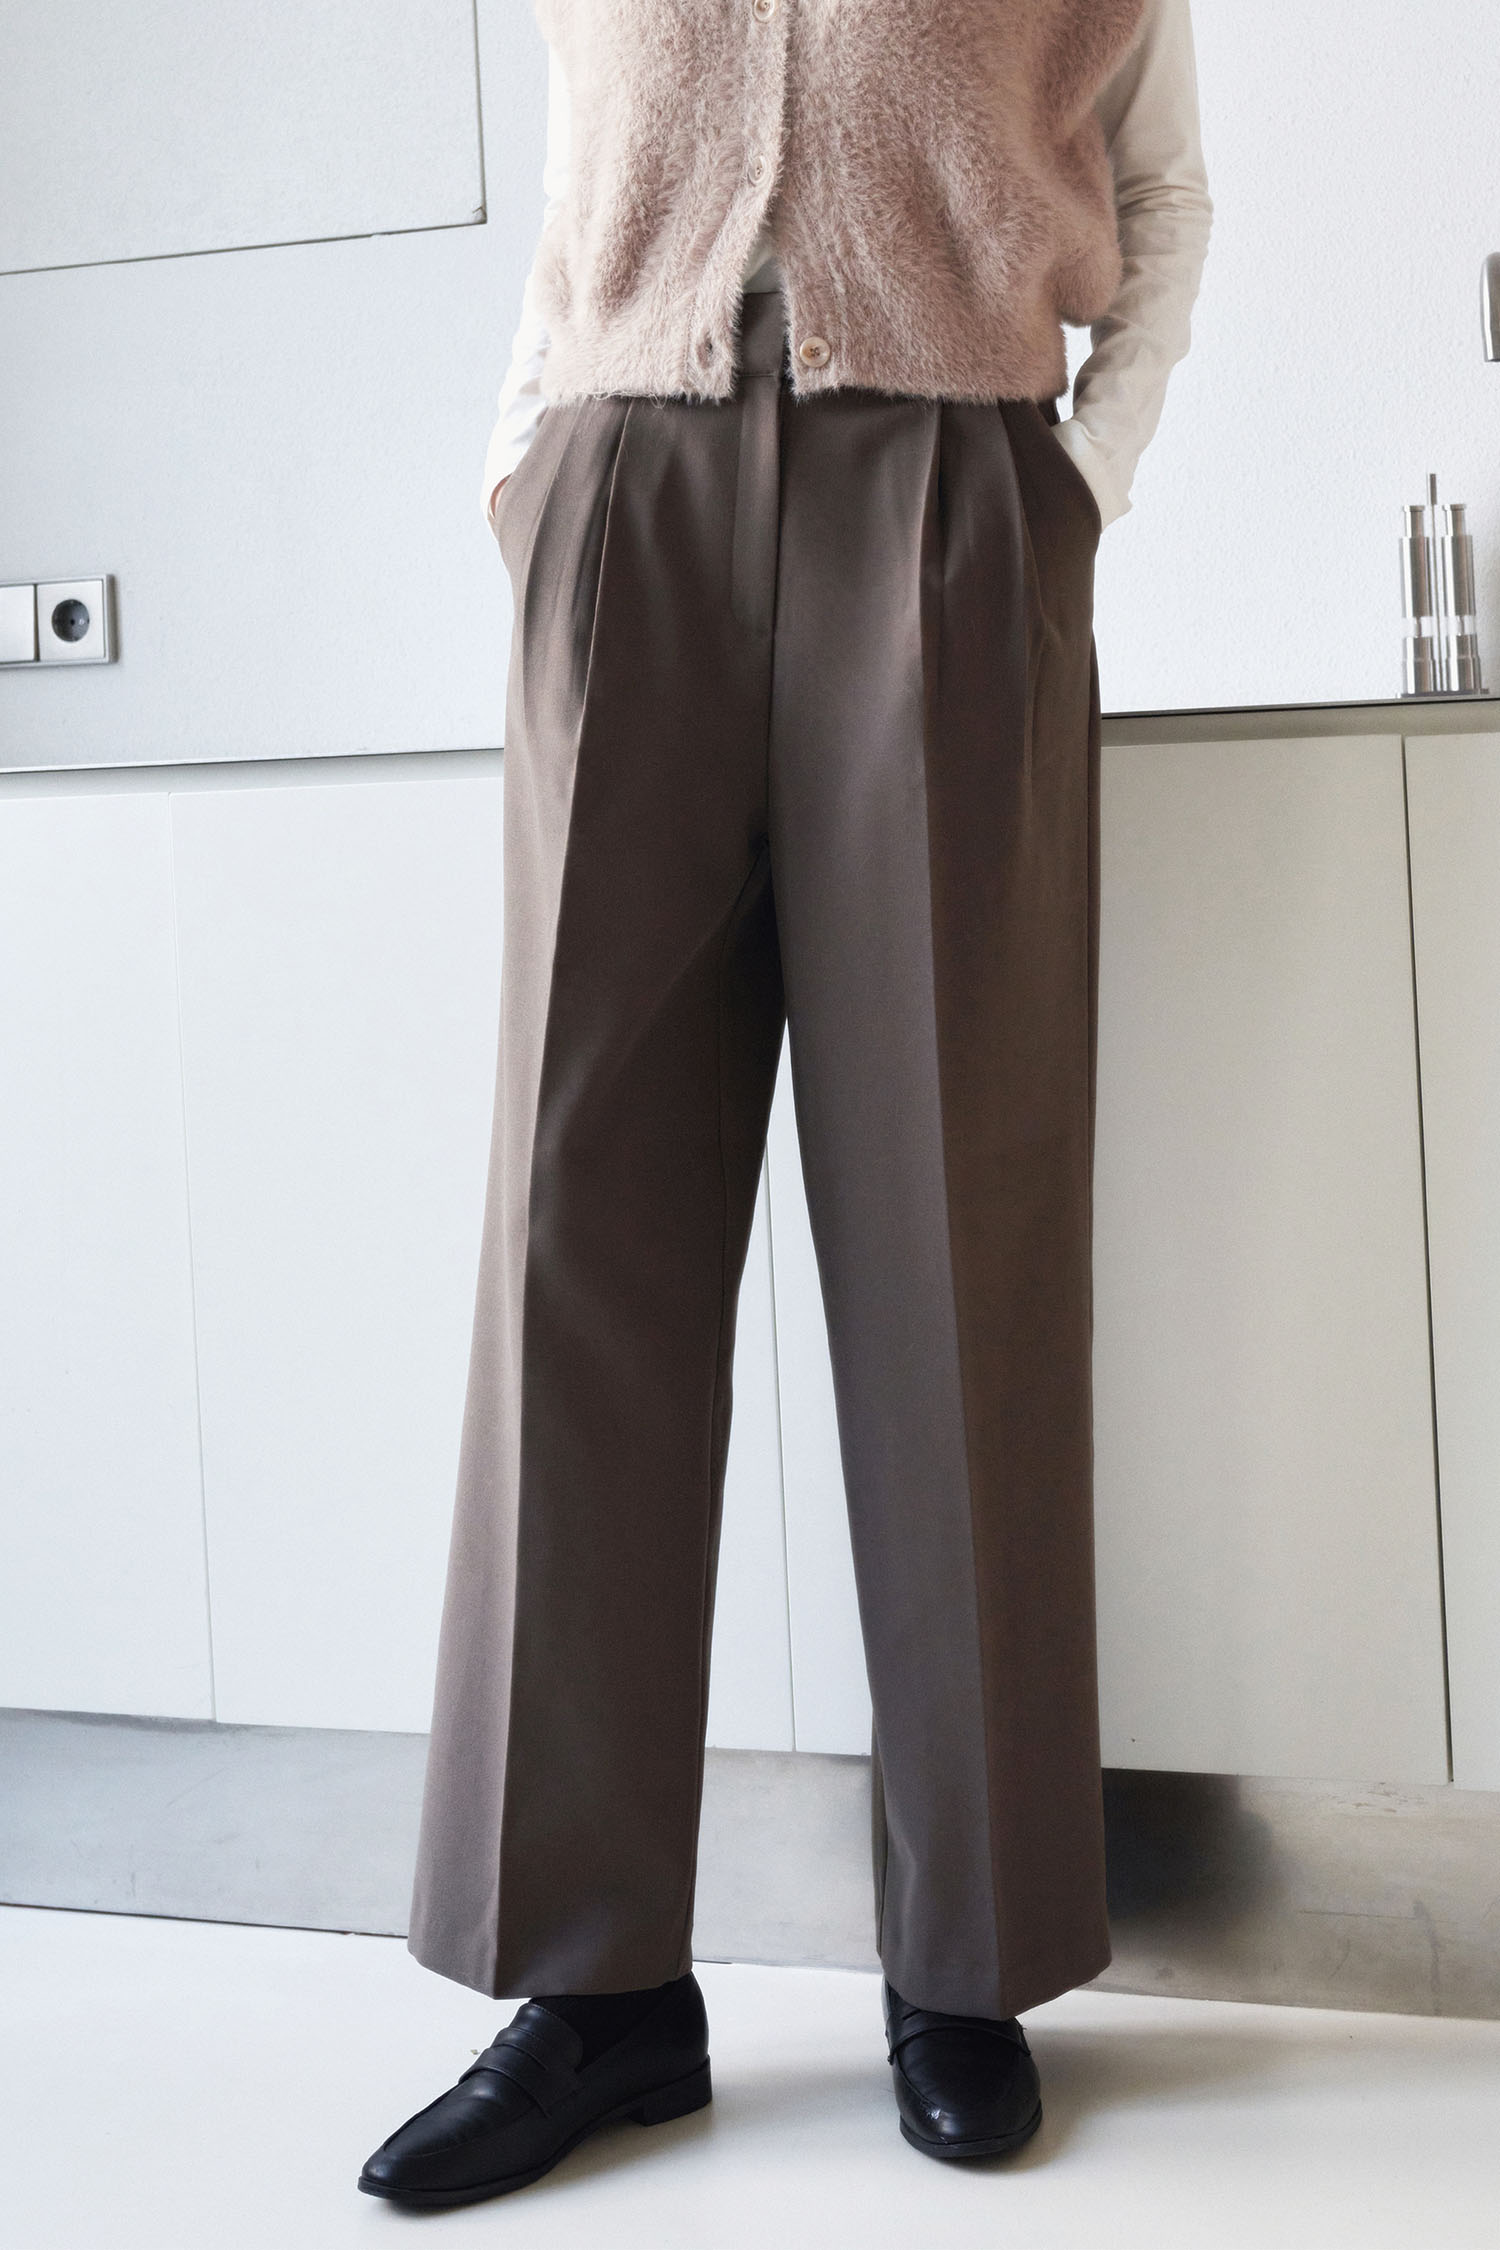 Look two pintuck side button slacks - brown